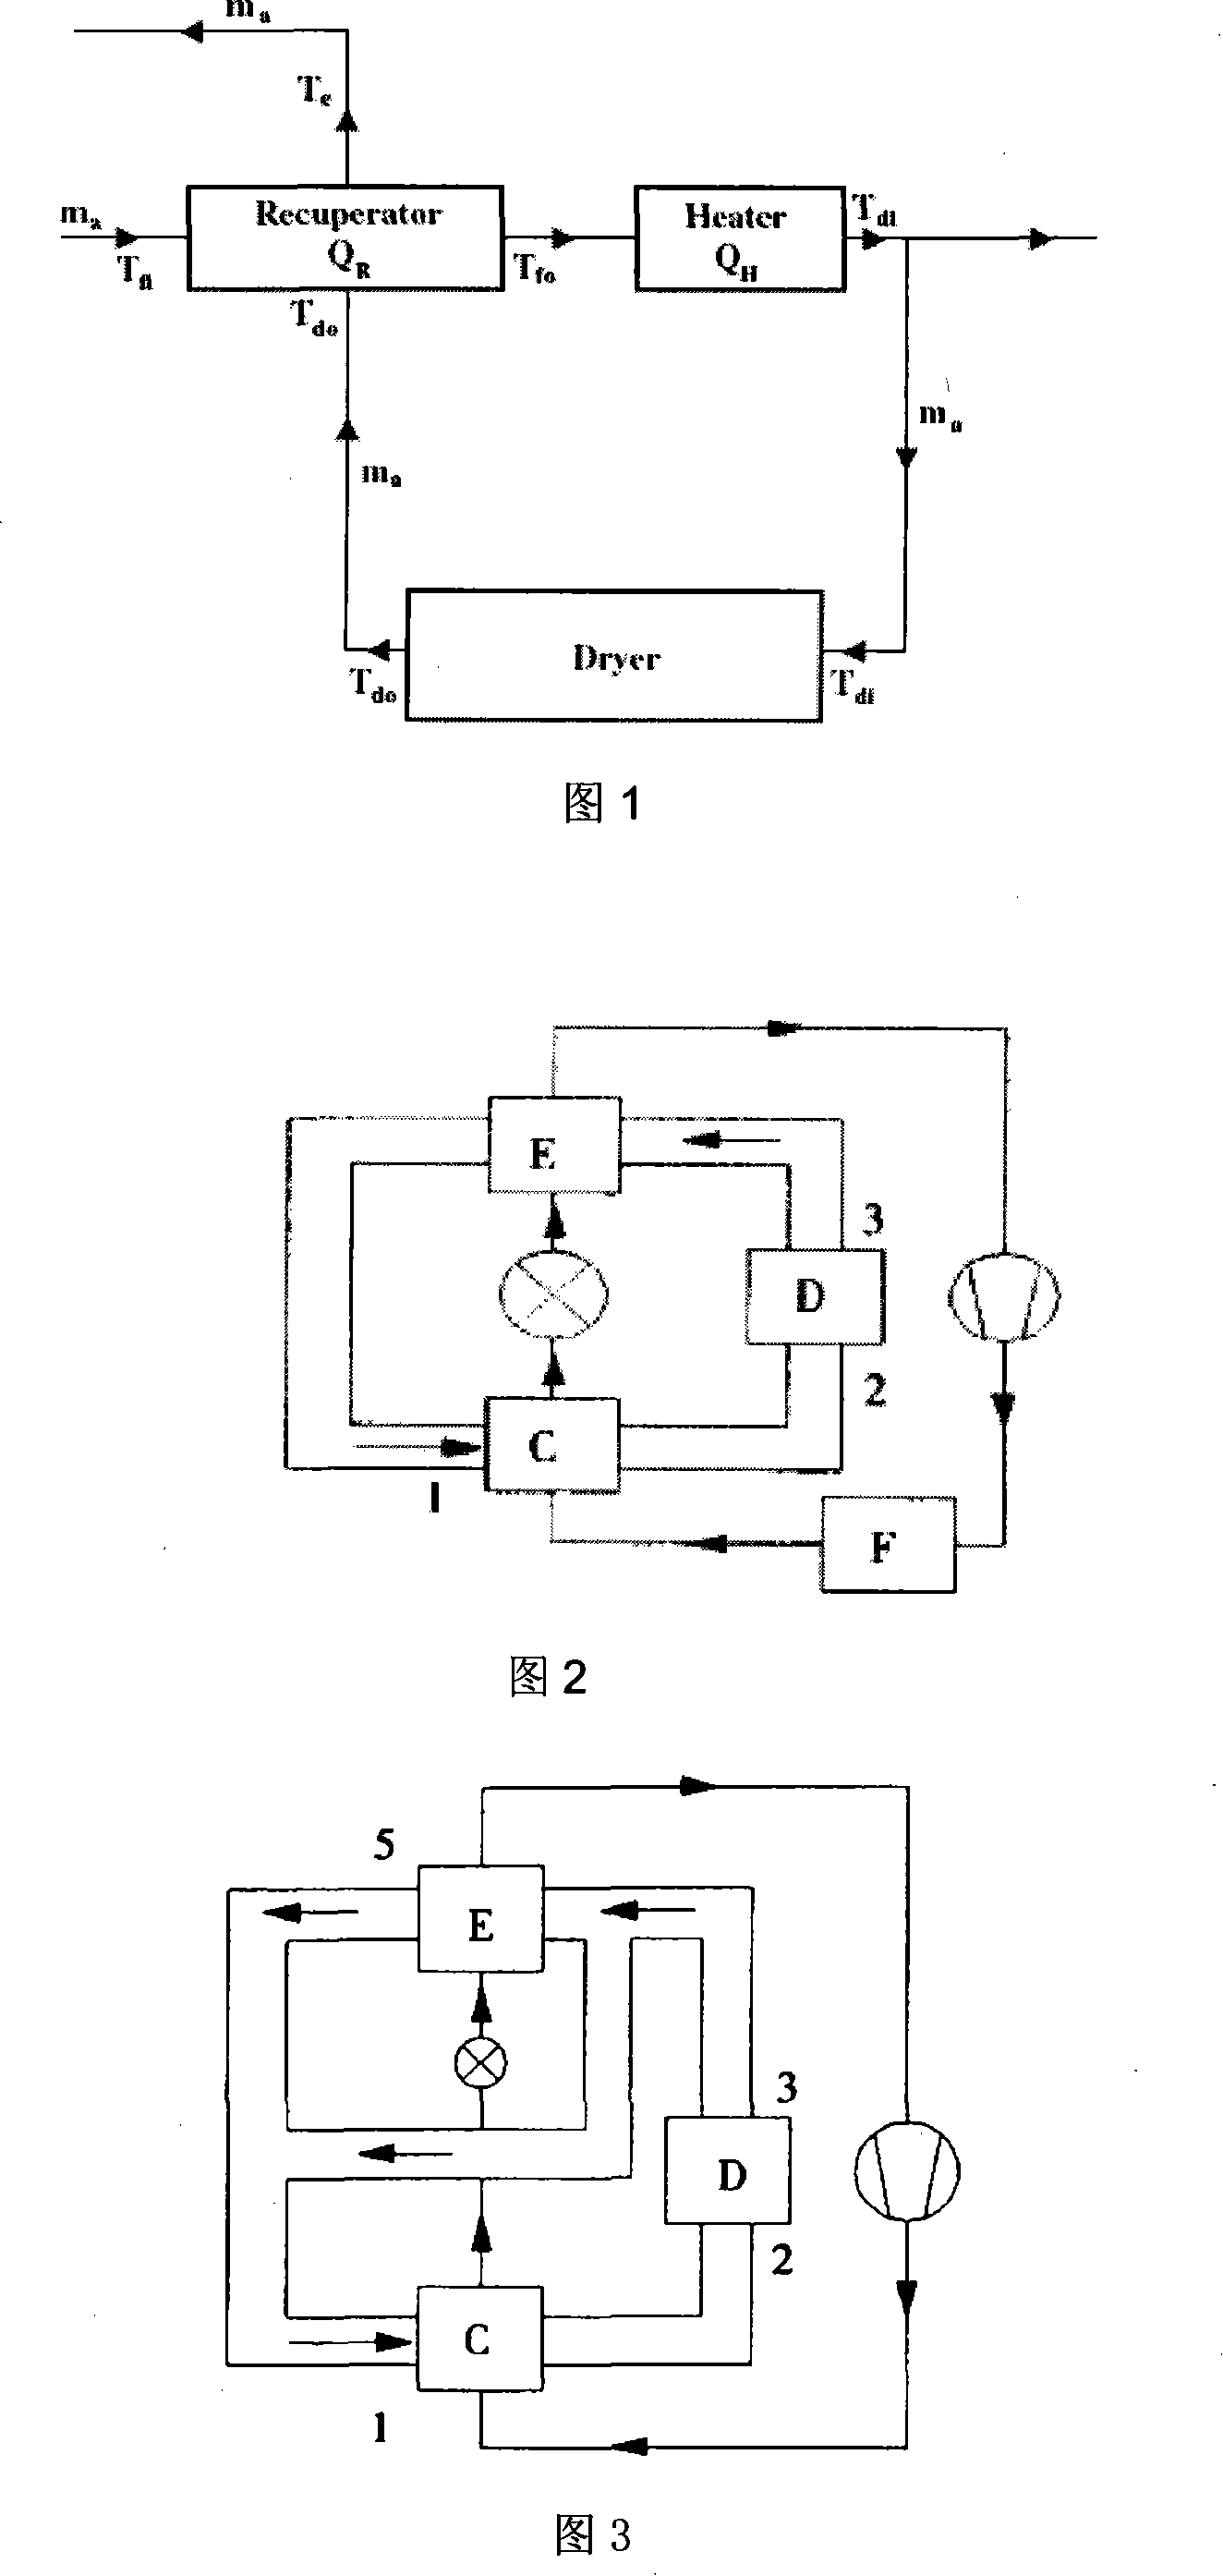 Exhaust-free highly-effective drying system and method